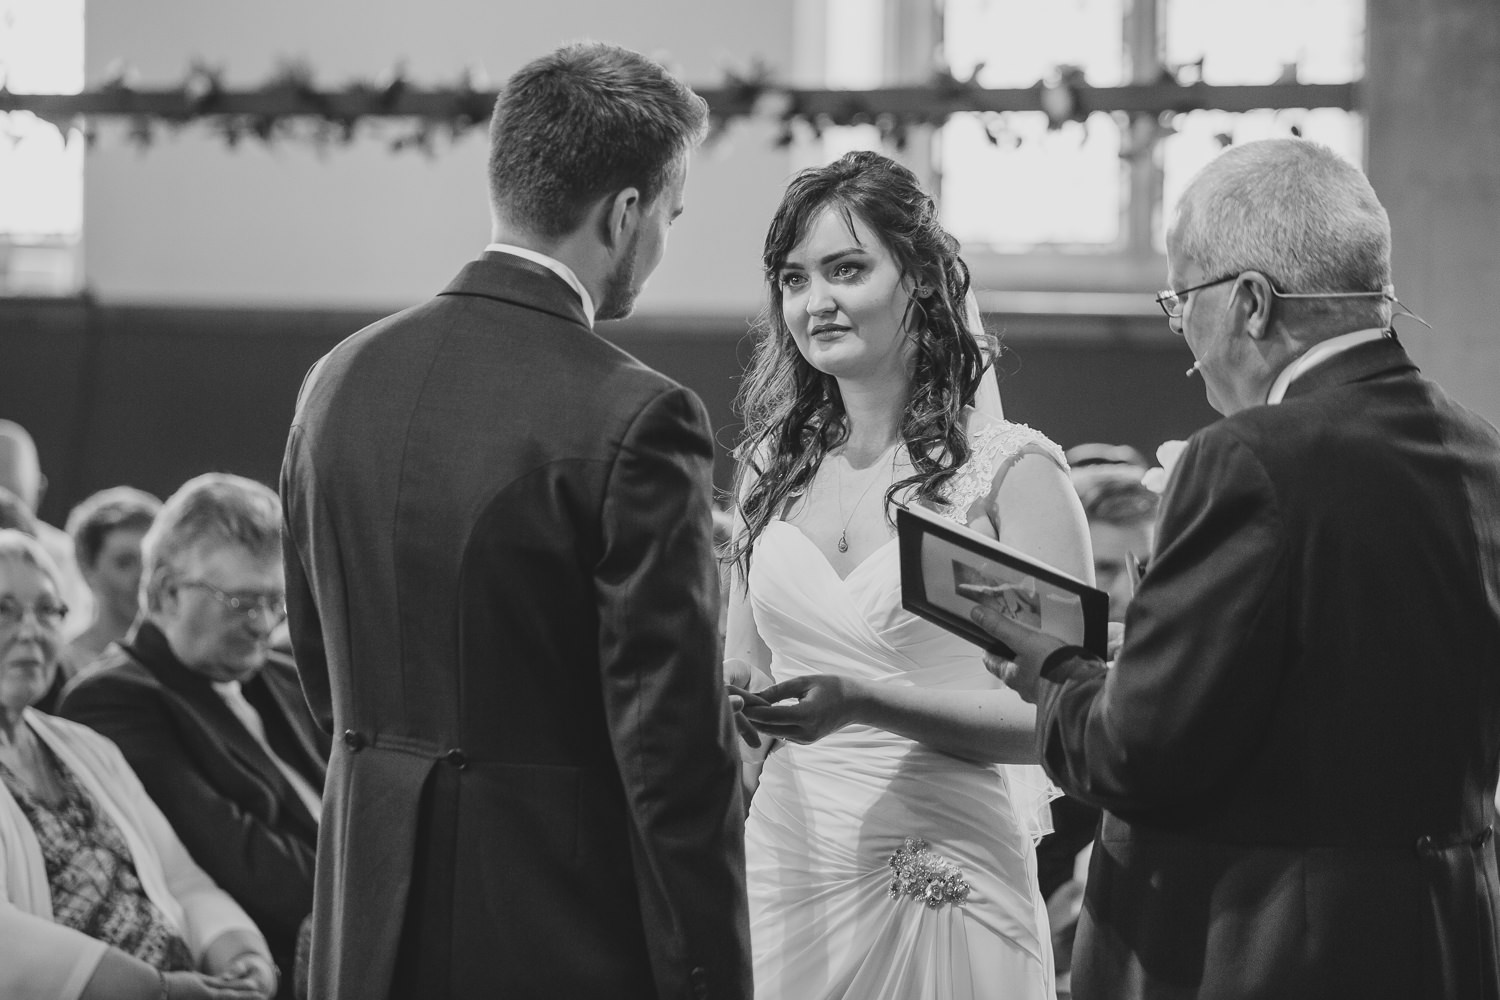 Black and white photo of a bride and groom exchanging vowels, during a church wedding ceremony